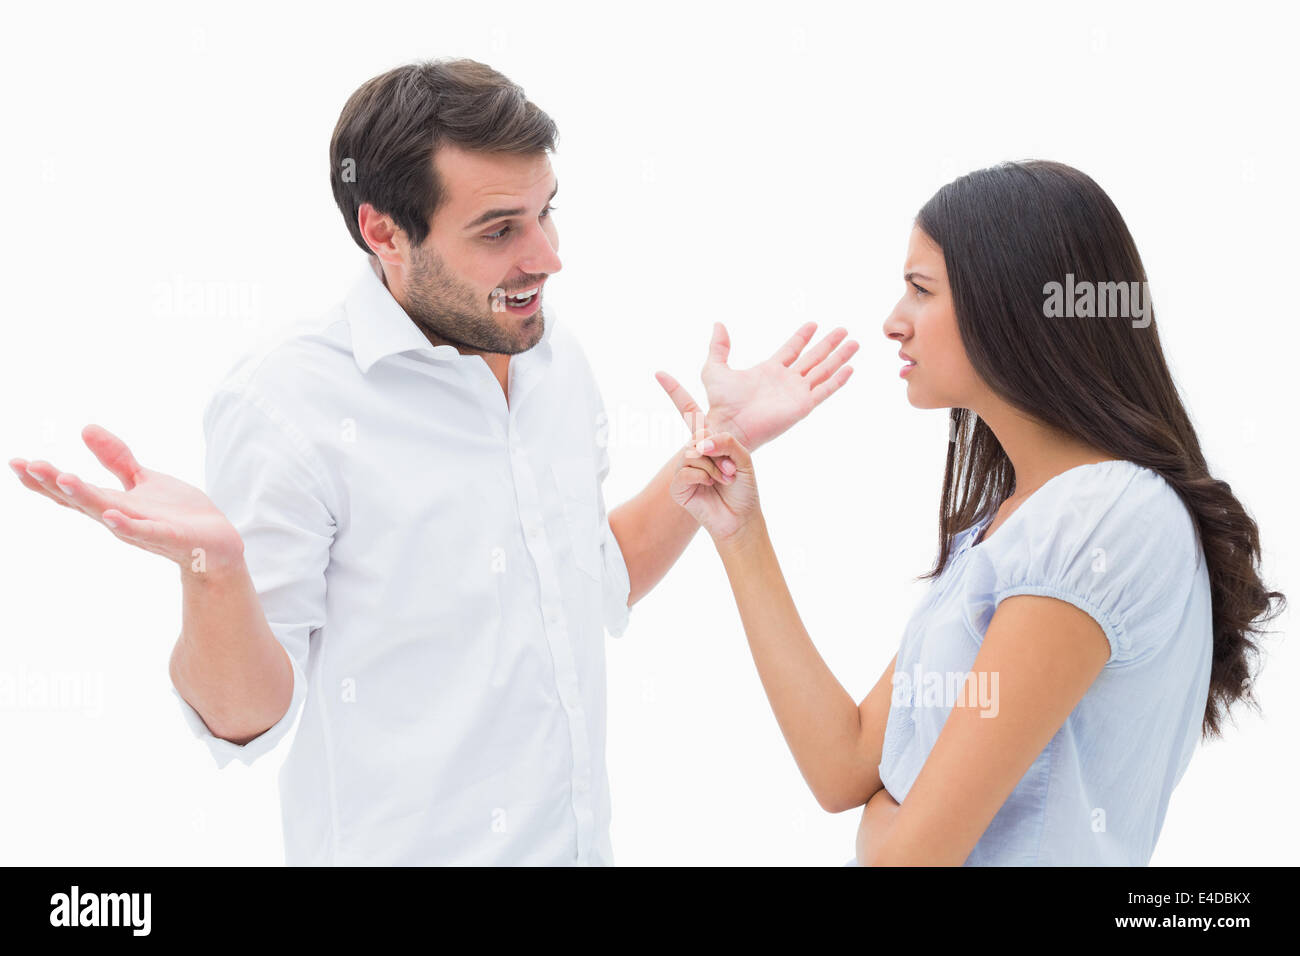 Angry brunette accusing her boyfriend Stock Photo